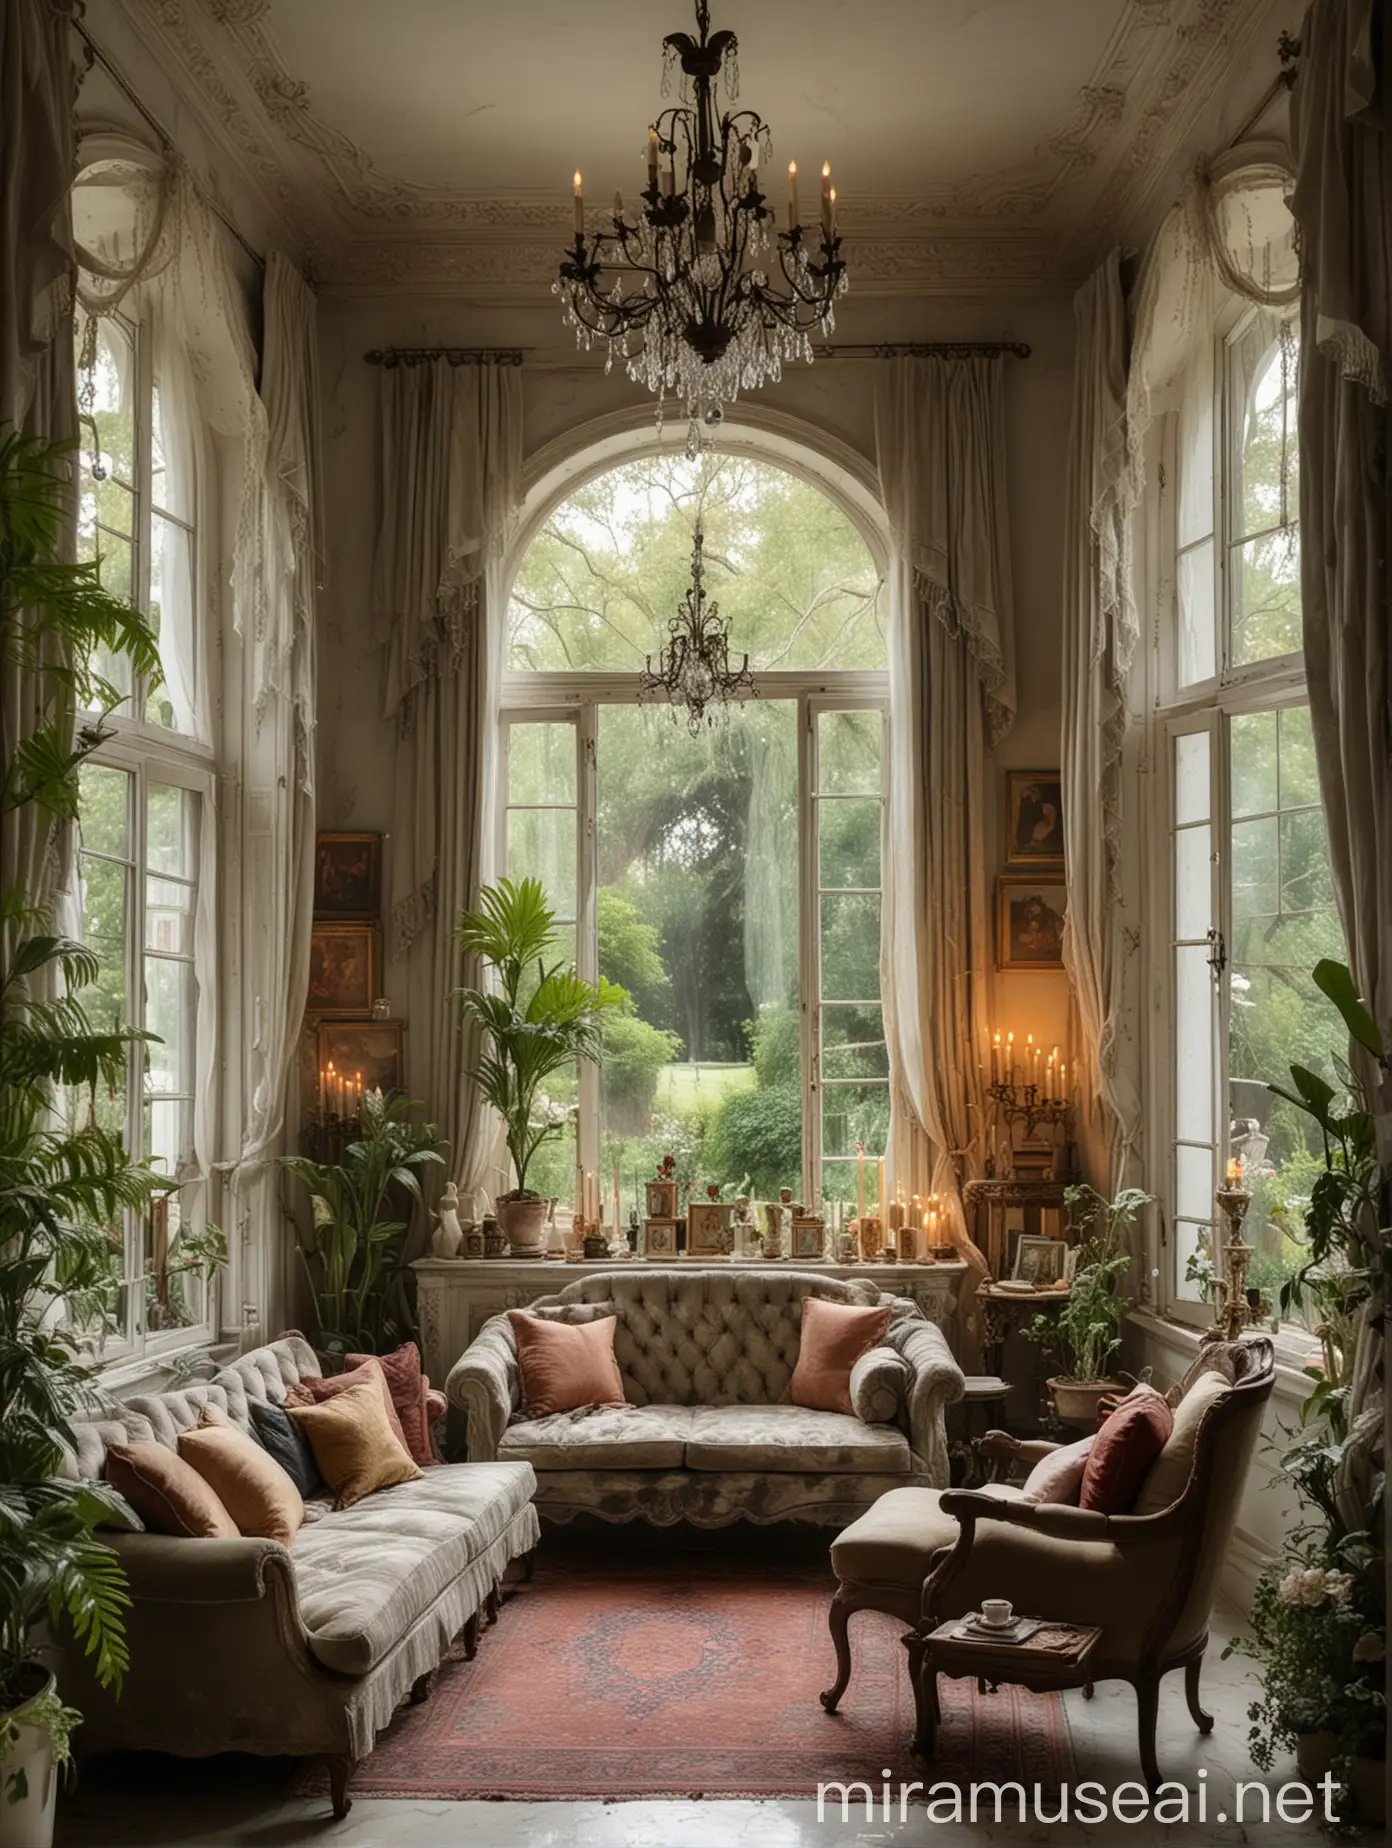 interior beautiful garden, candles, paintings on the walls, marble sculptures, big windows with flying curtains, chandelier, books, dandy Oscar Wilde inspiration